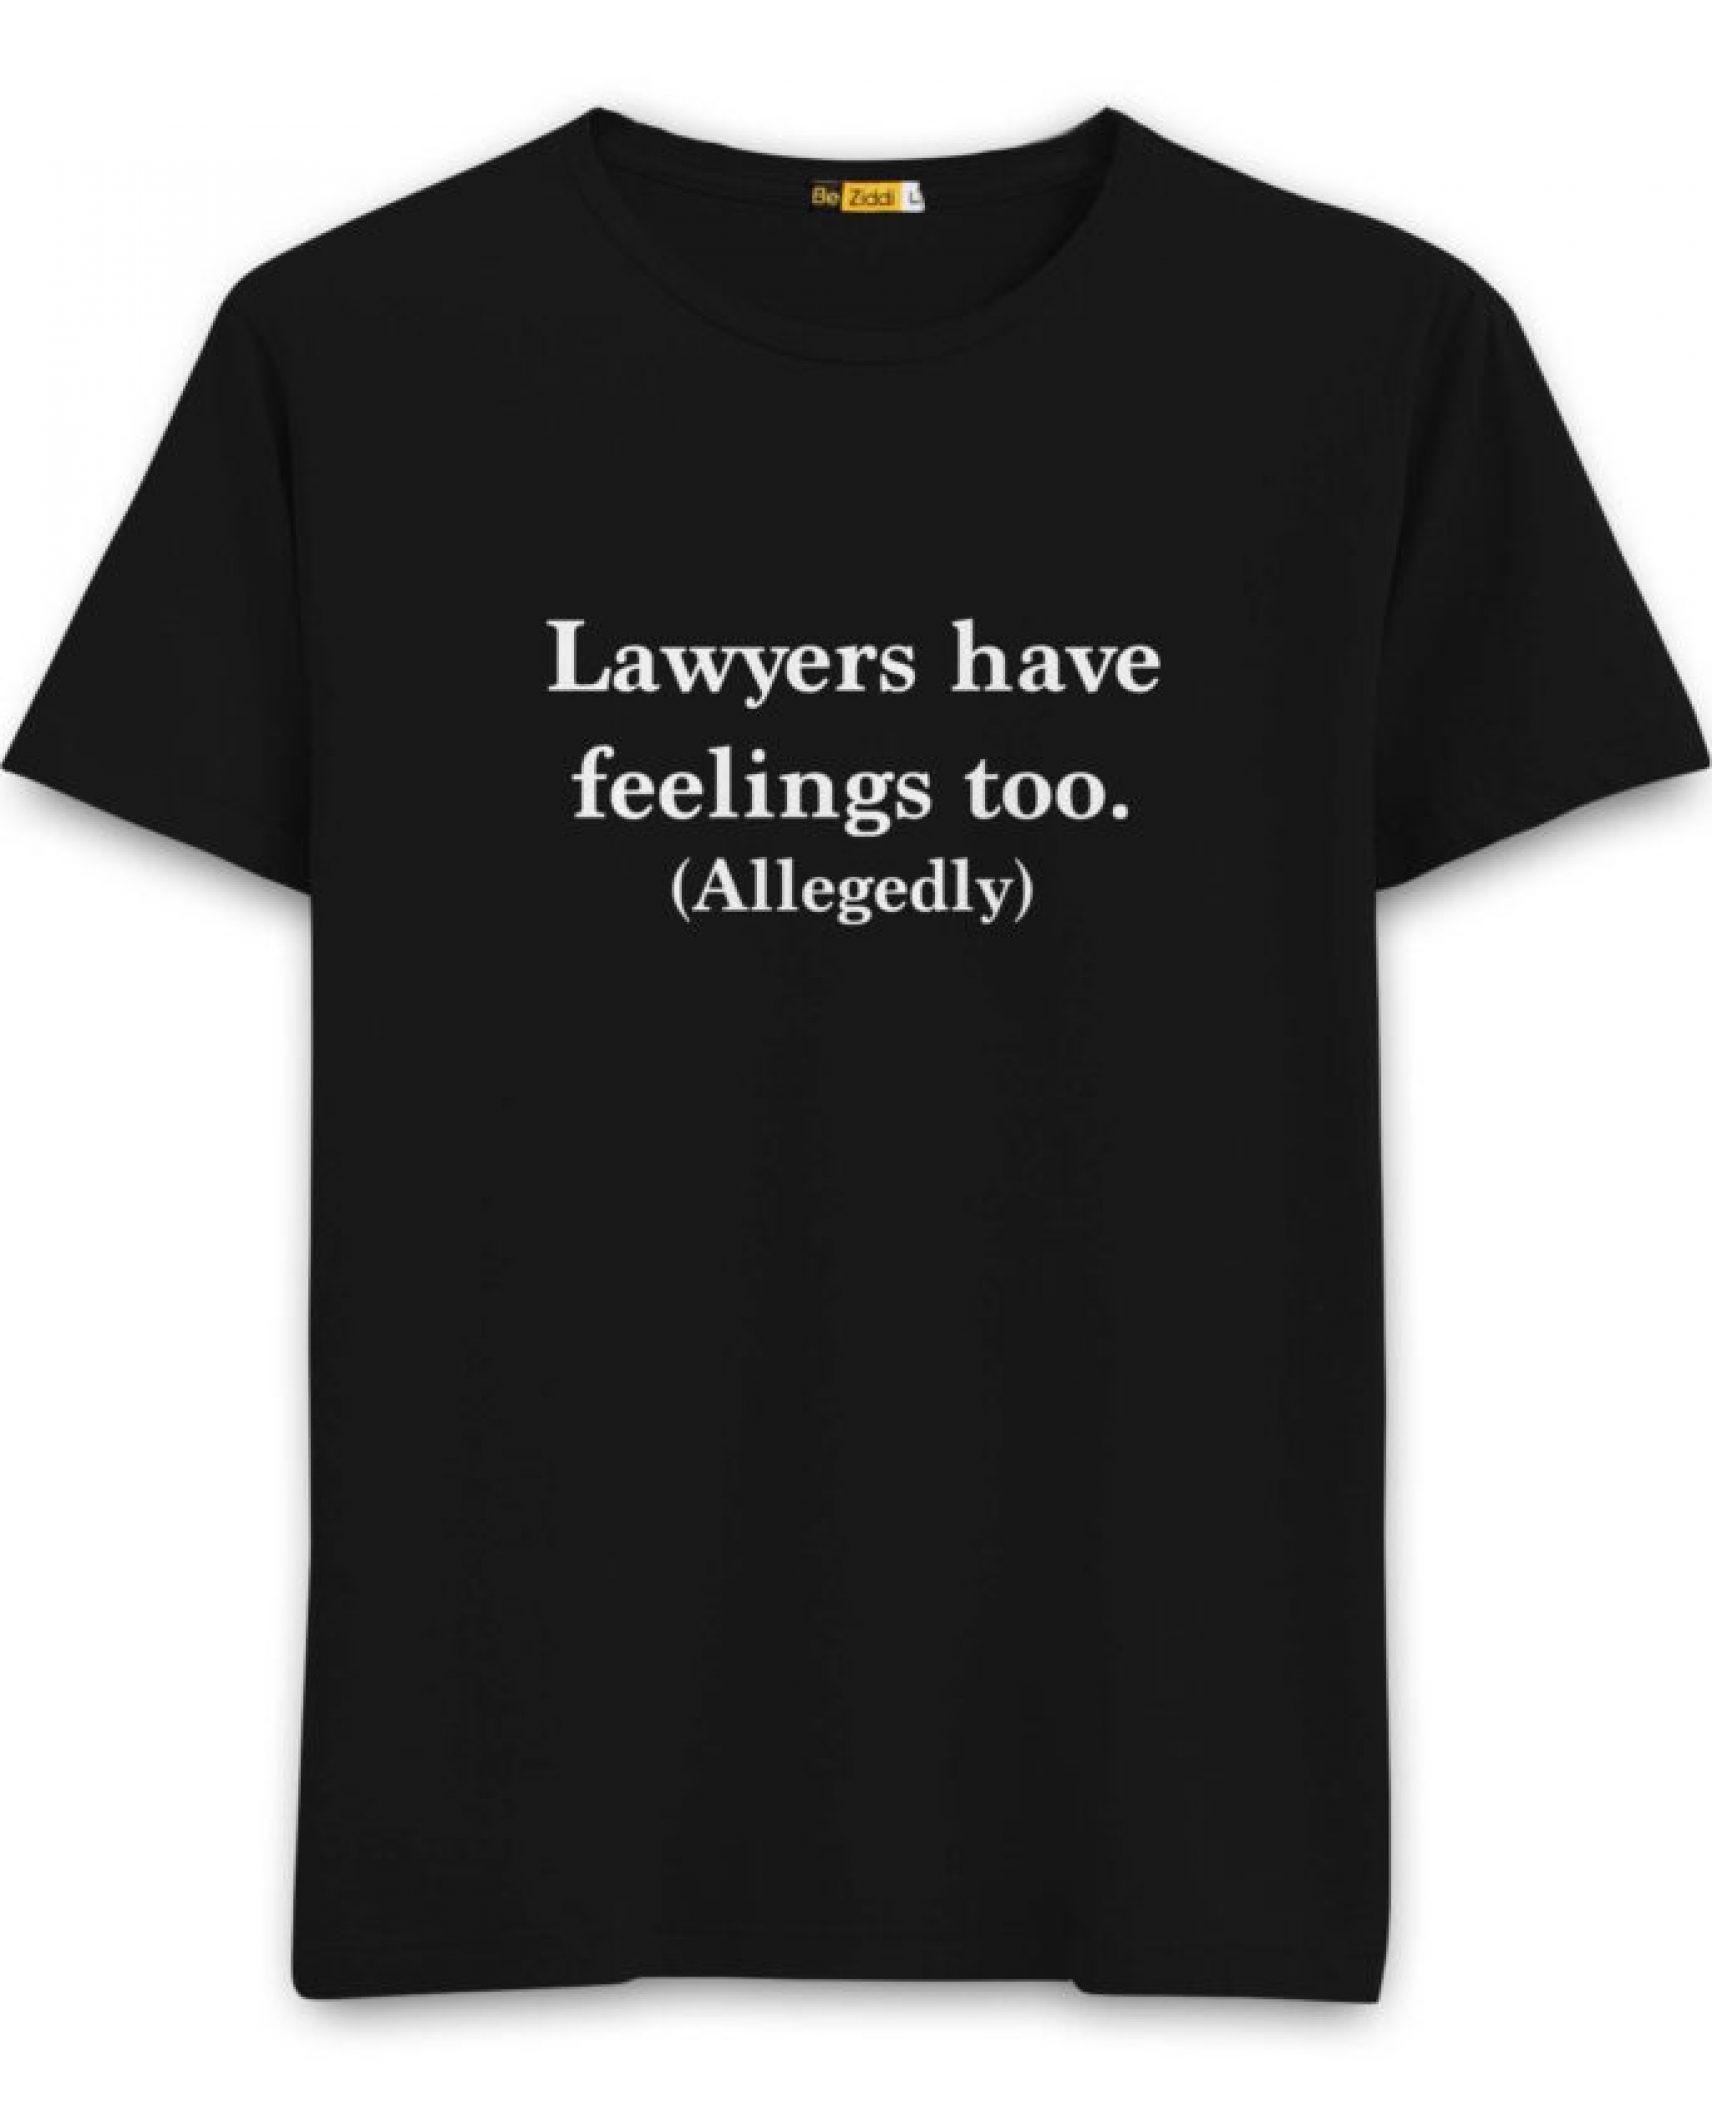 Buy Funny Lawyer T-shirts Online, Shop Lawyer Quotes T-shirts